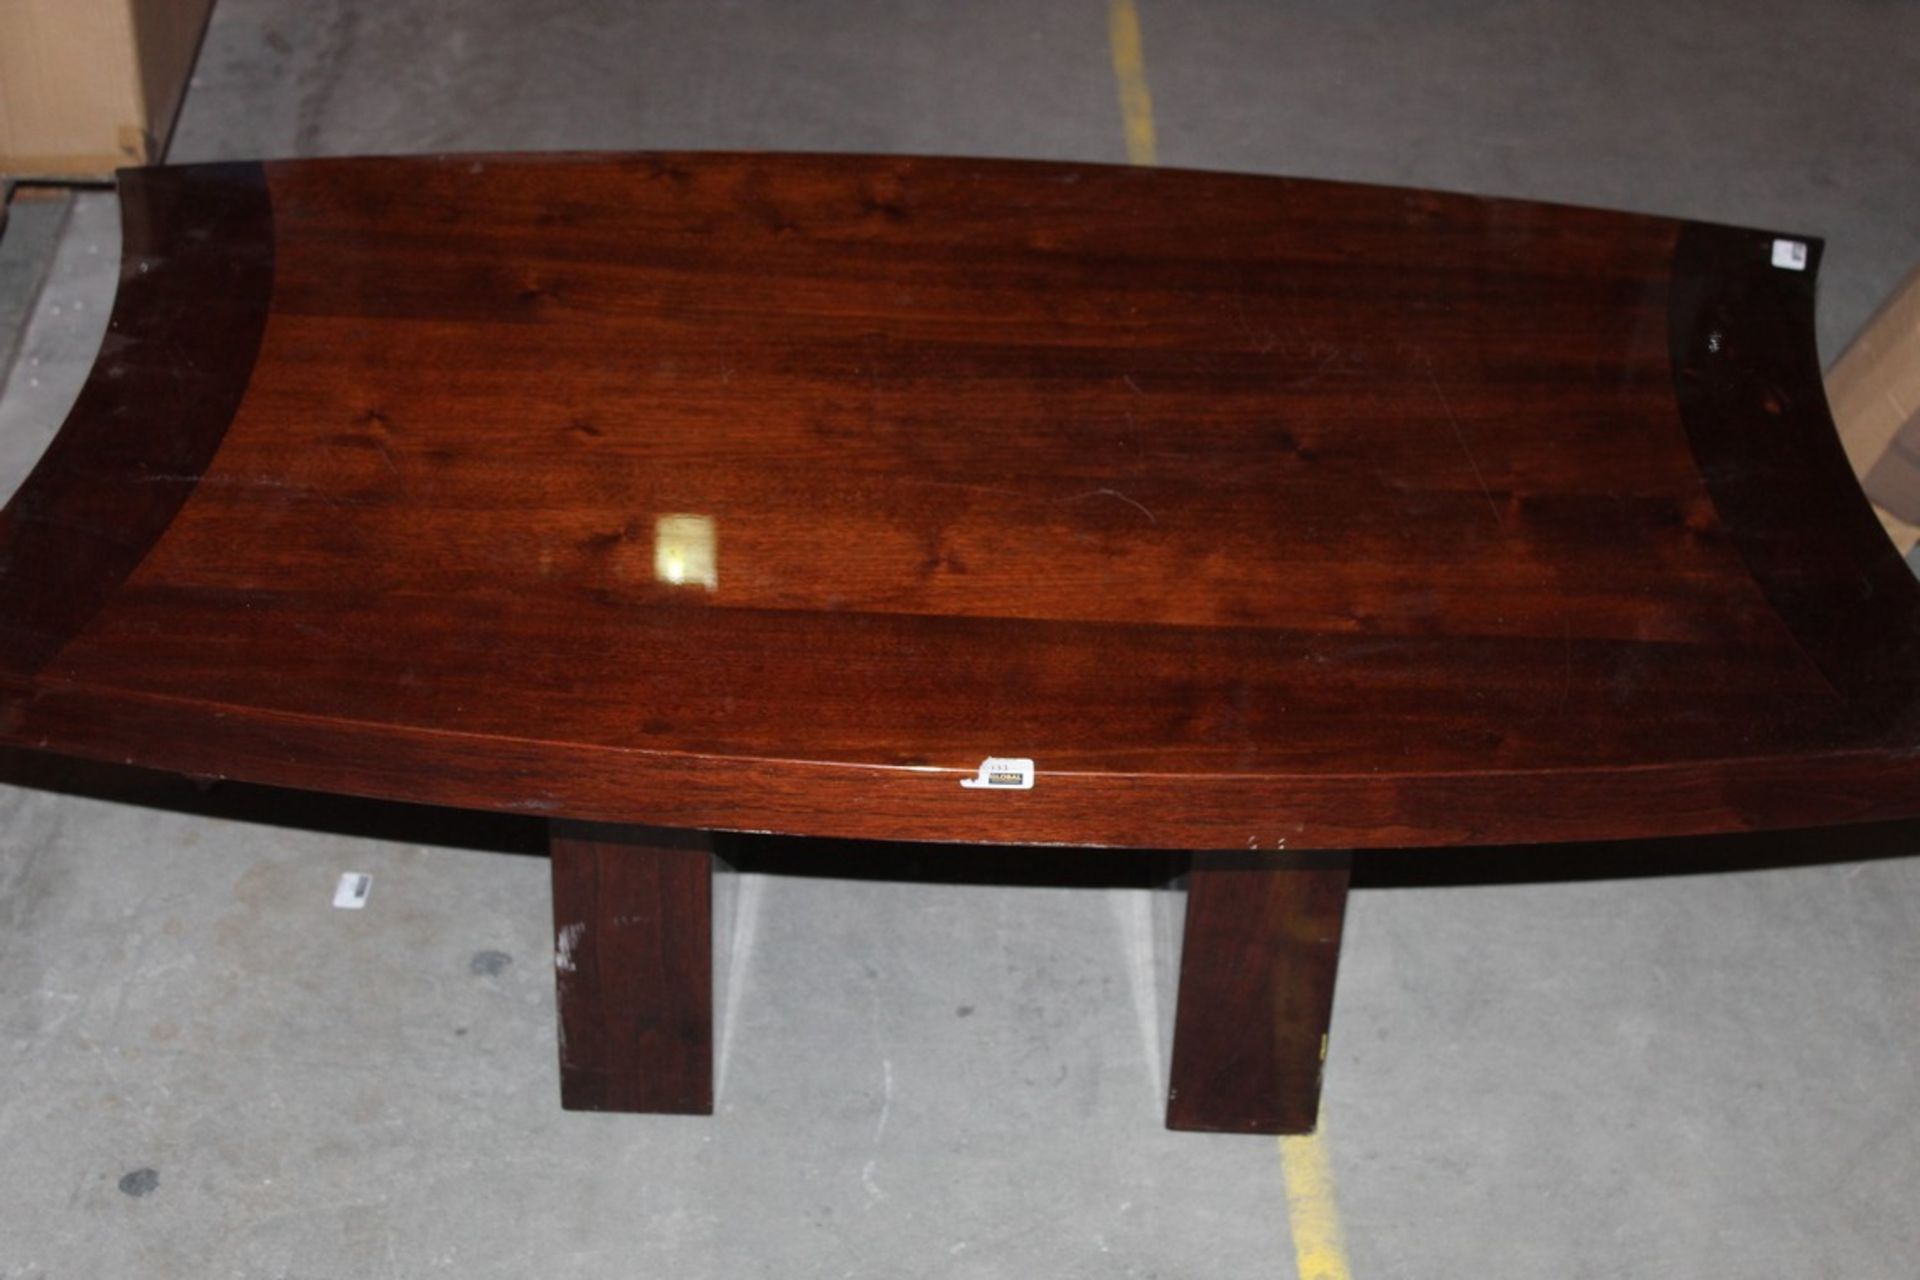 Mahogany Gloss Finish Designer Curved Edge Coffee Table (Public Viewing & Appraisals Available)